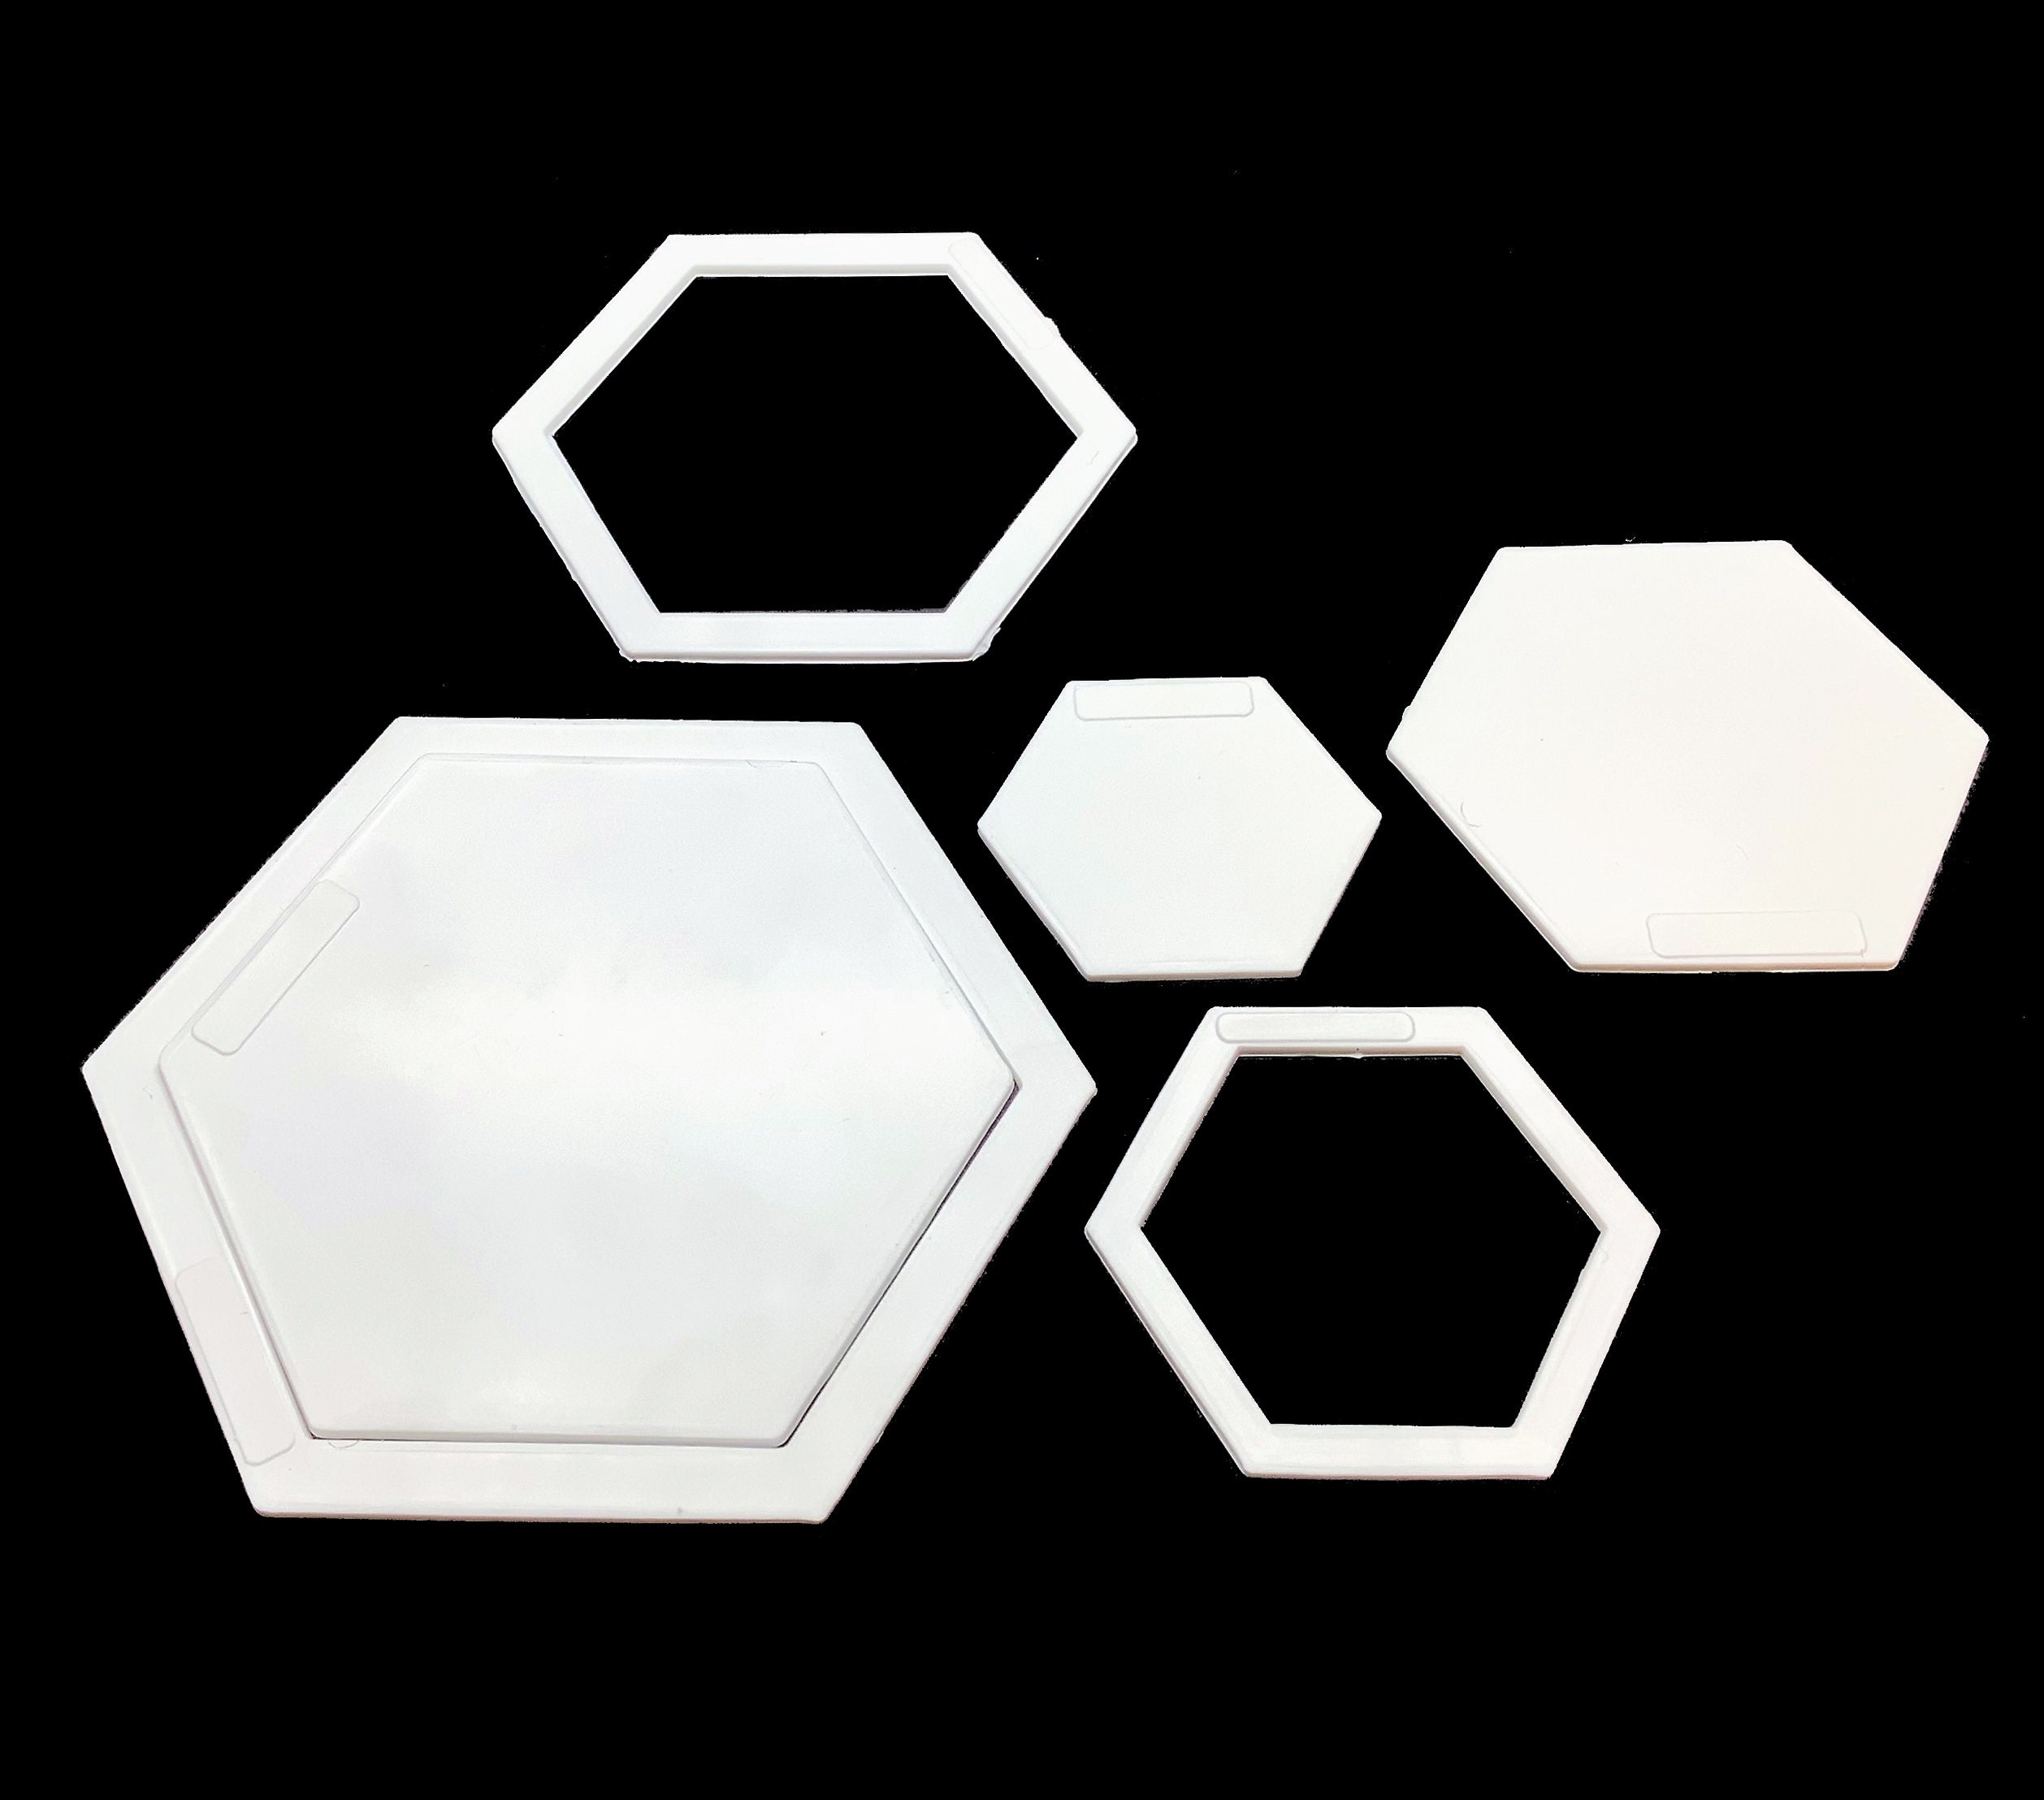 Hexagonal Quilting Template Set, 3.5 Inches, 4mm Acrylic Made in UK, Paper  Piecing, Quilting Rulers and Templates, Origami 